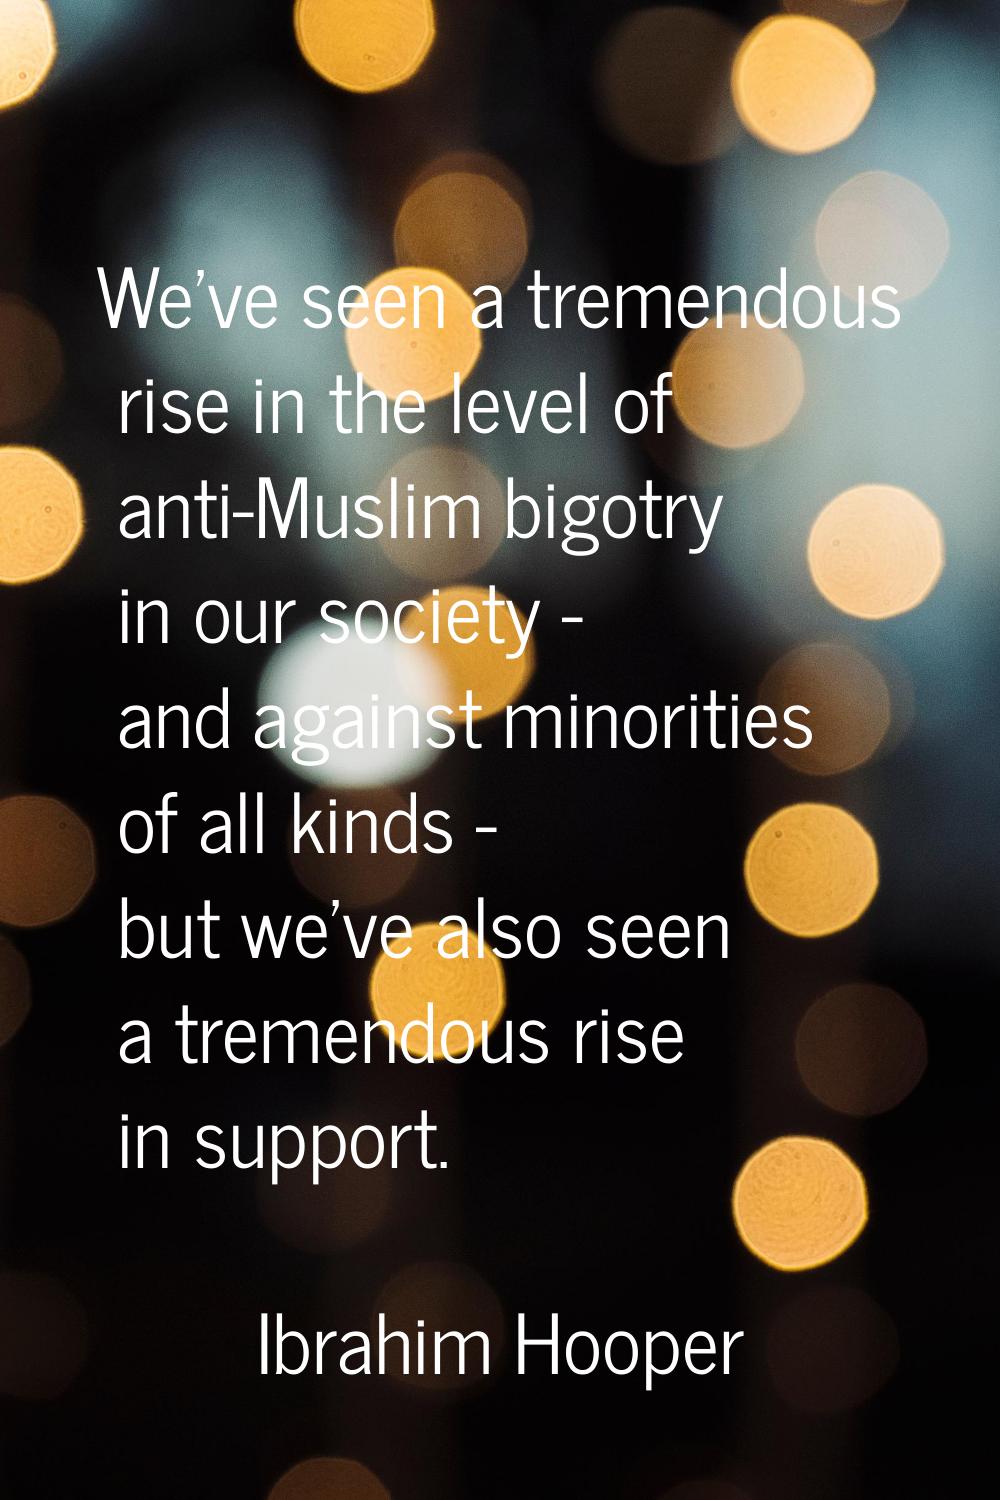 We've seen a tremendous rise in the level of anti-Muslim bigotry in our society - and against minor